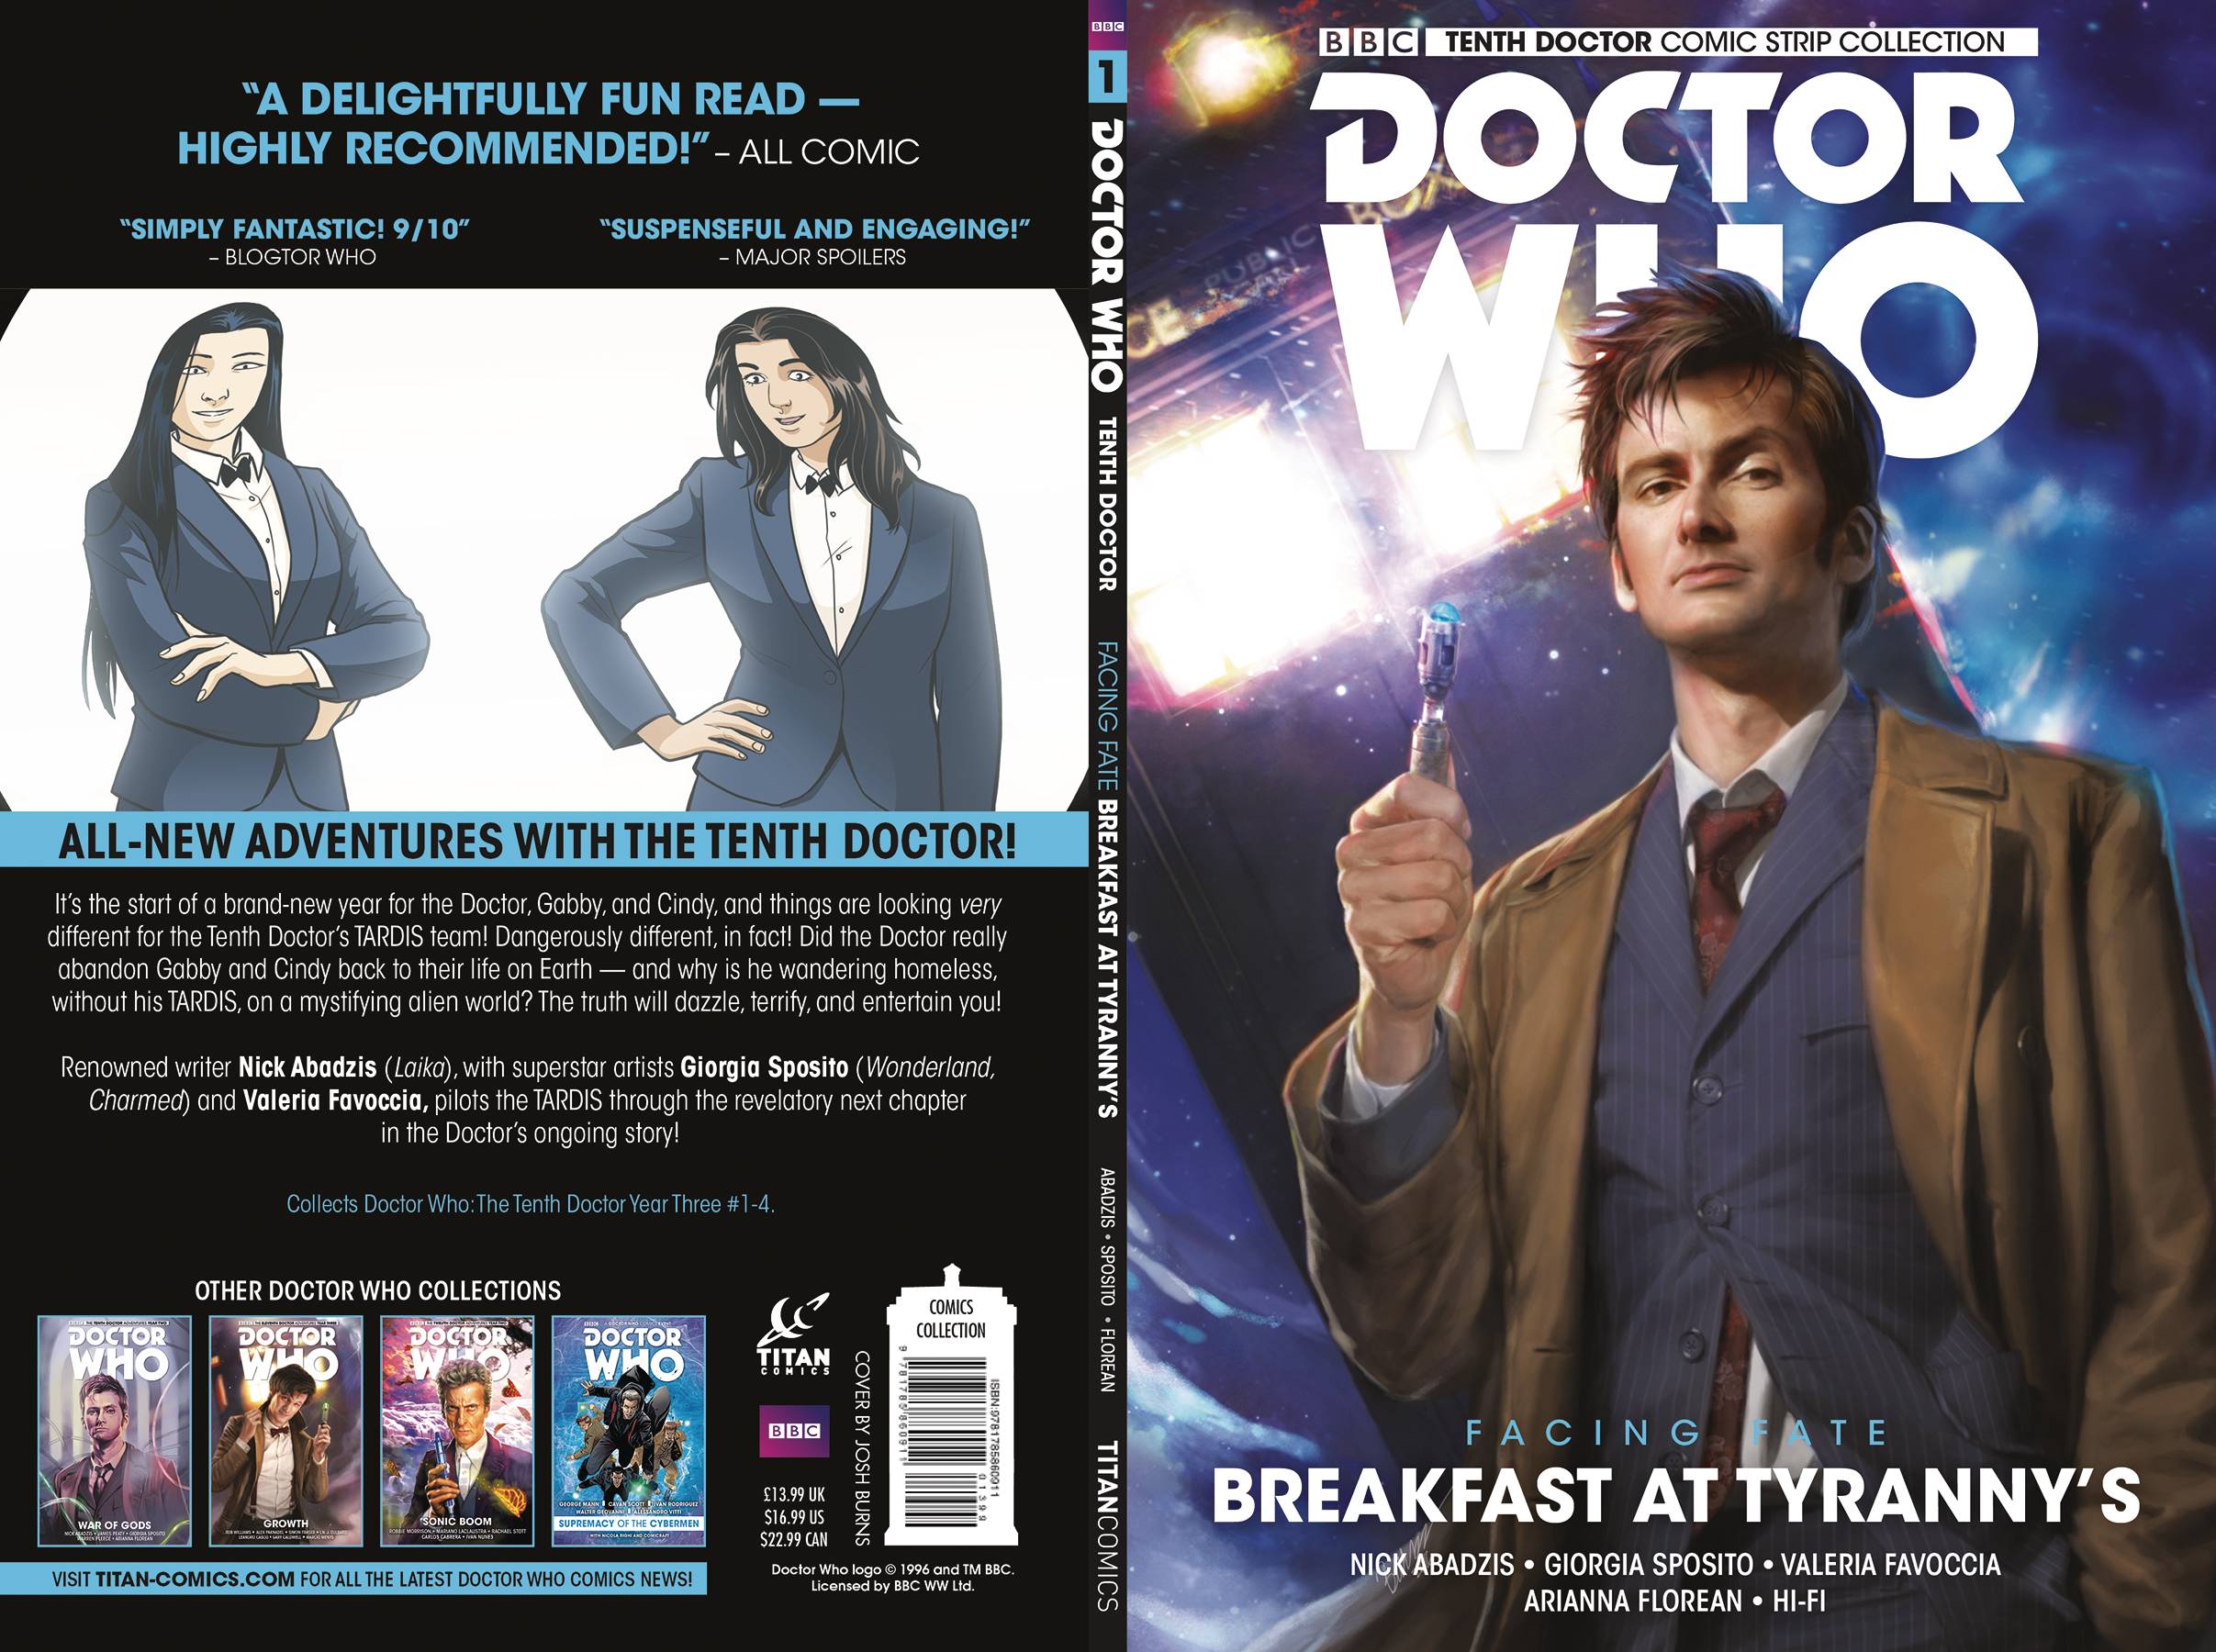 Doctor Who 10th Doctor Facing Fate Graphic Novel Volume 1 Breakfast At Tyranny's